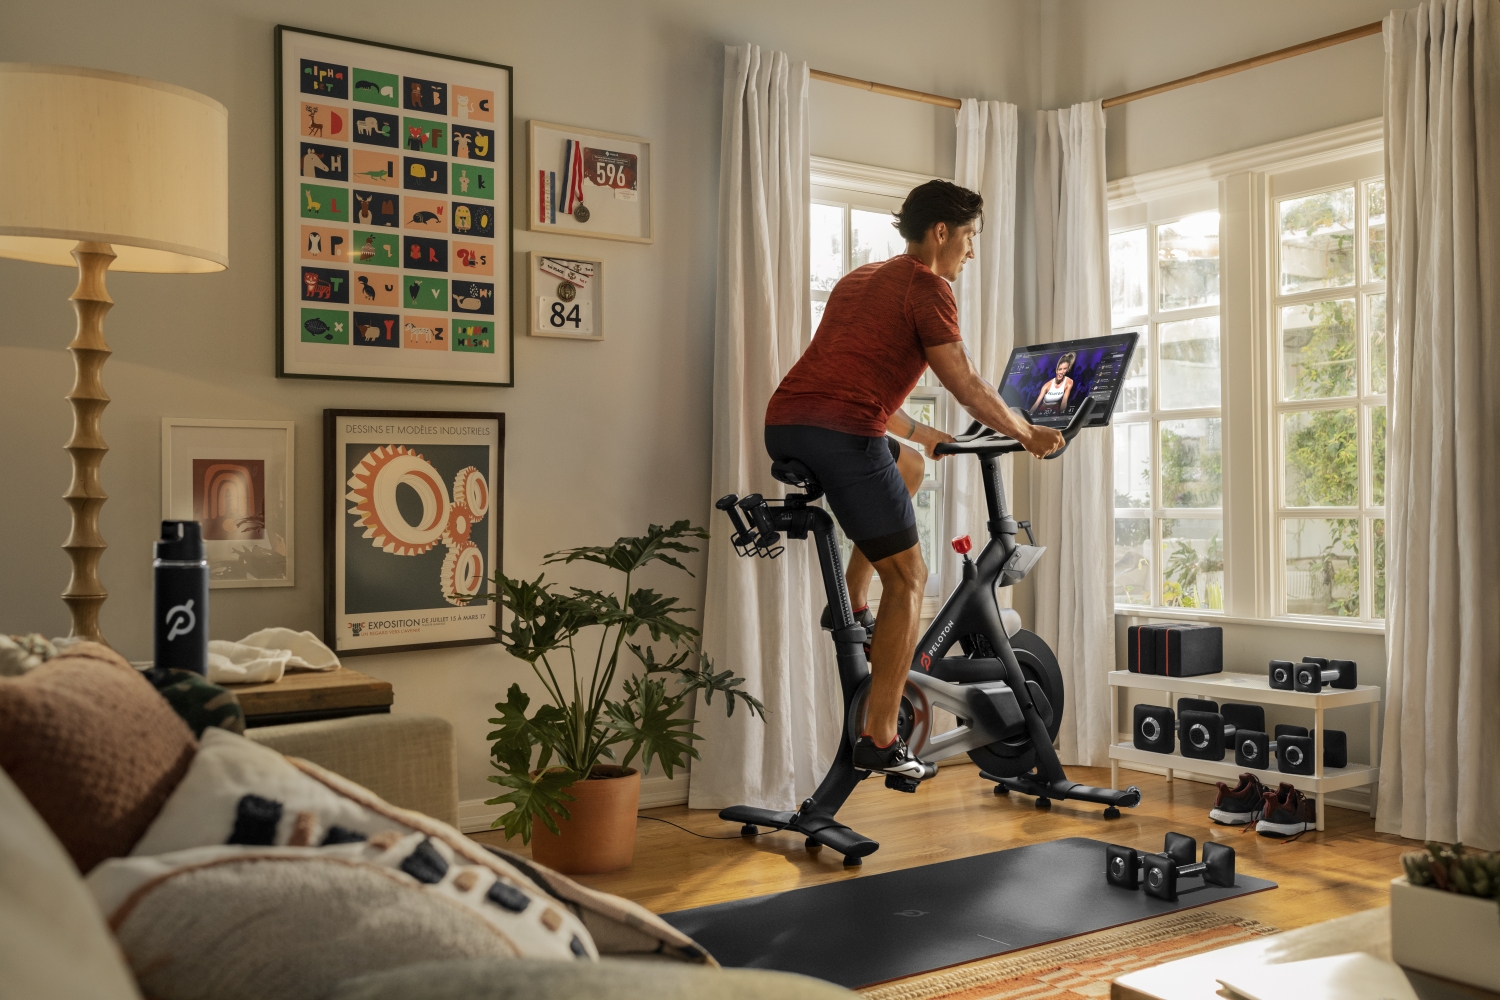 Peloton Bike Review: It’s All About the Experience | Digital Trends